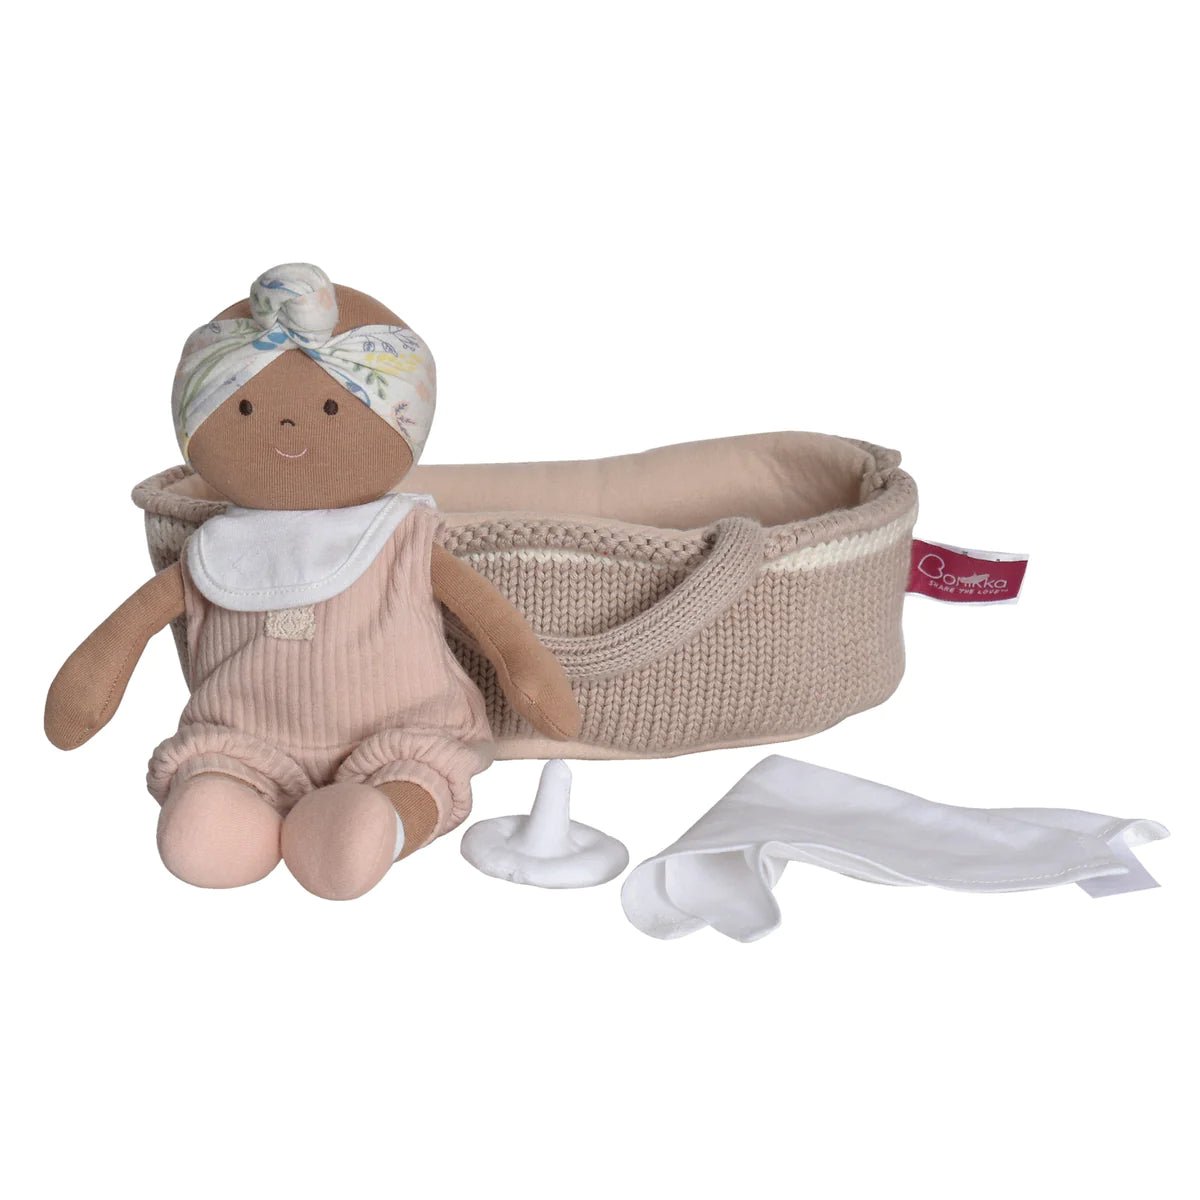 Baby Rheya Doll and Carrier Set